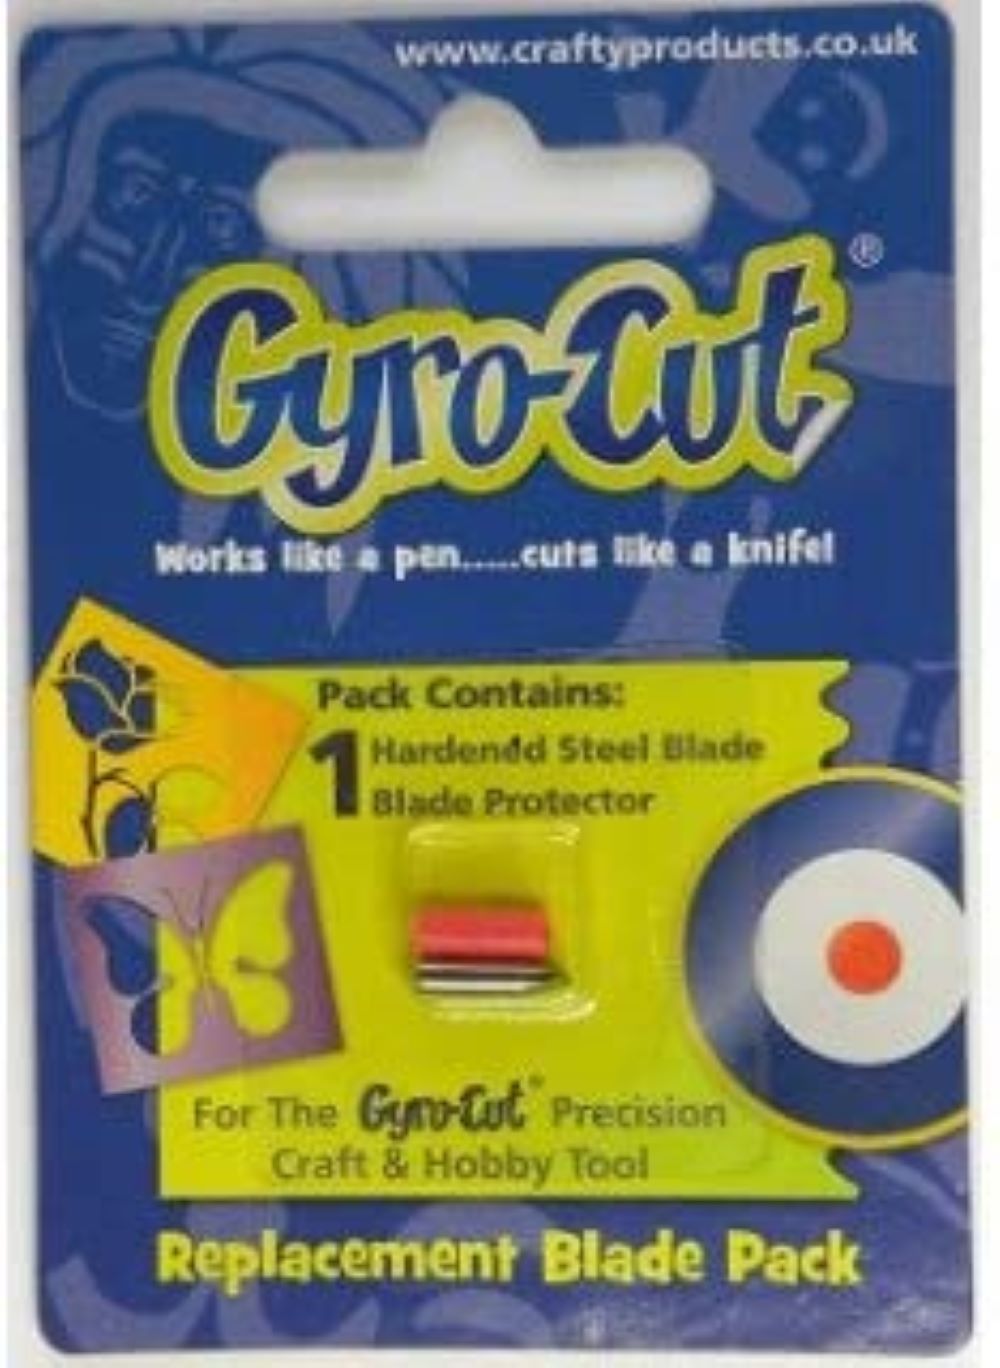 The Gyro-Cut Craft & Hobby Tool is now available at Hobby Lobby in